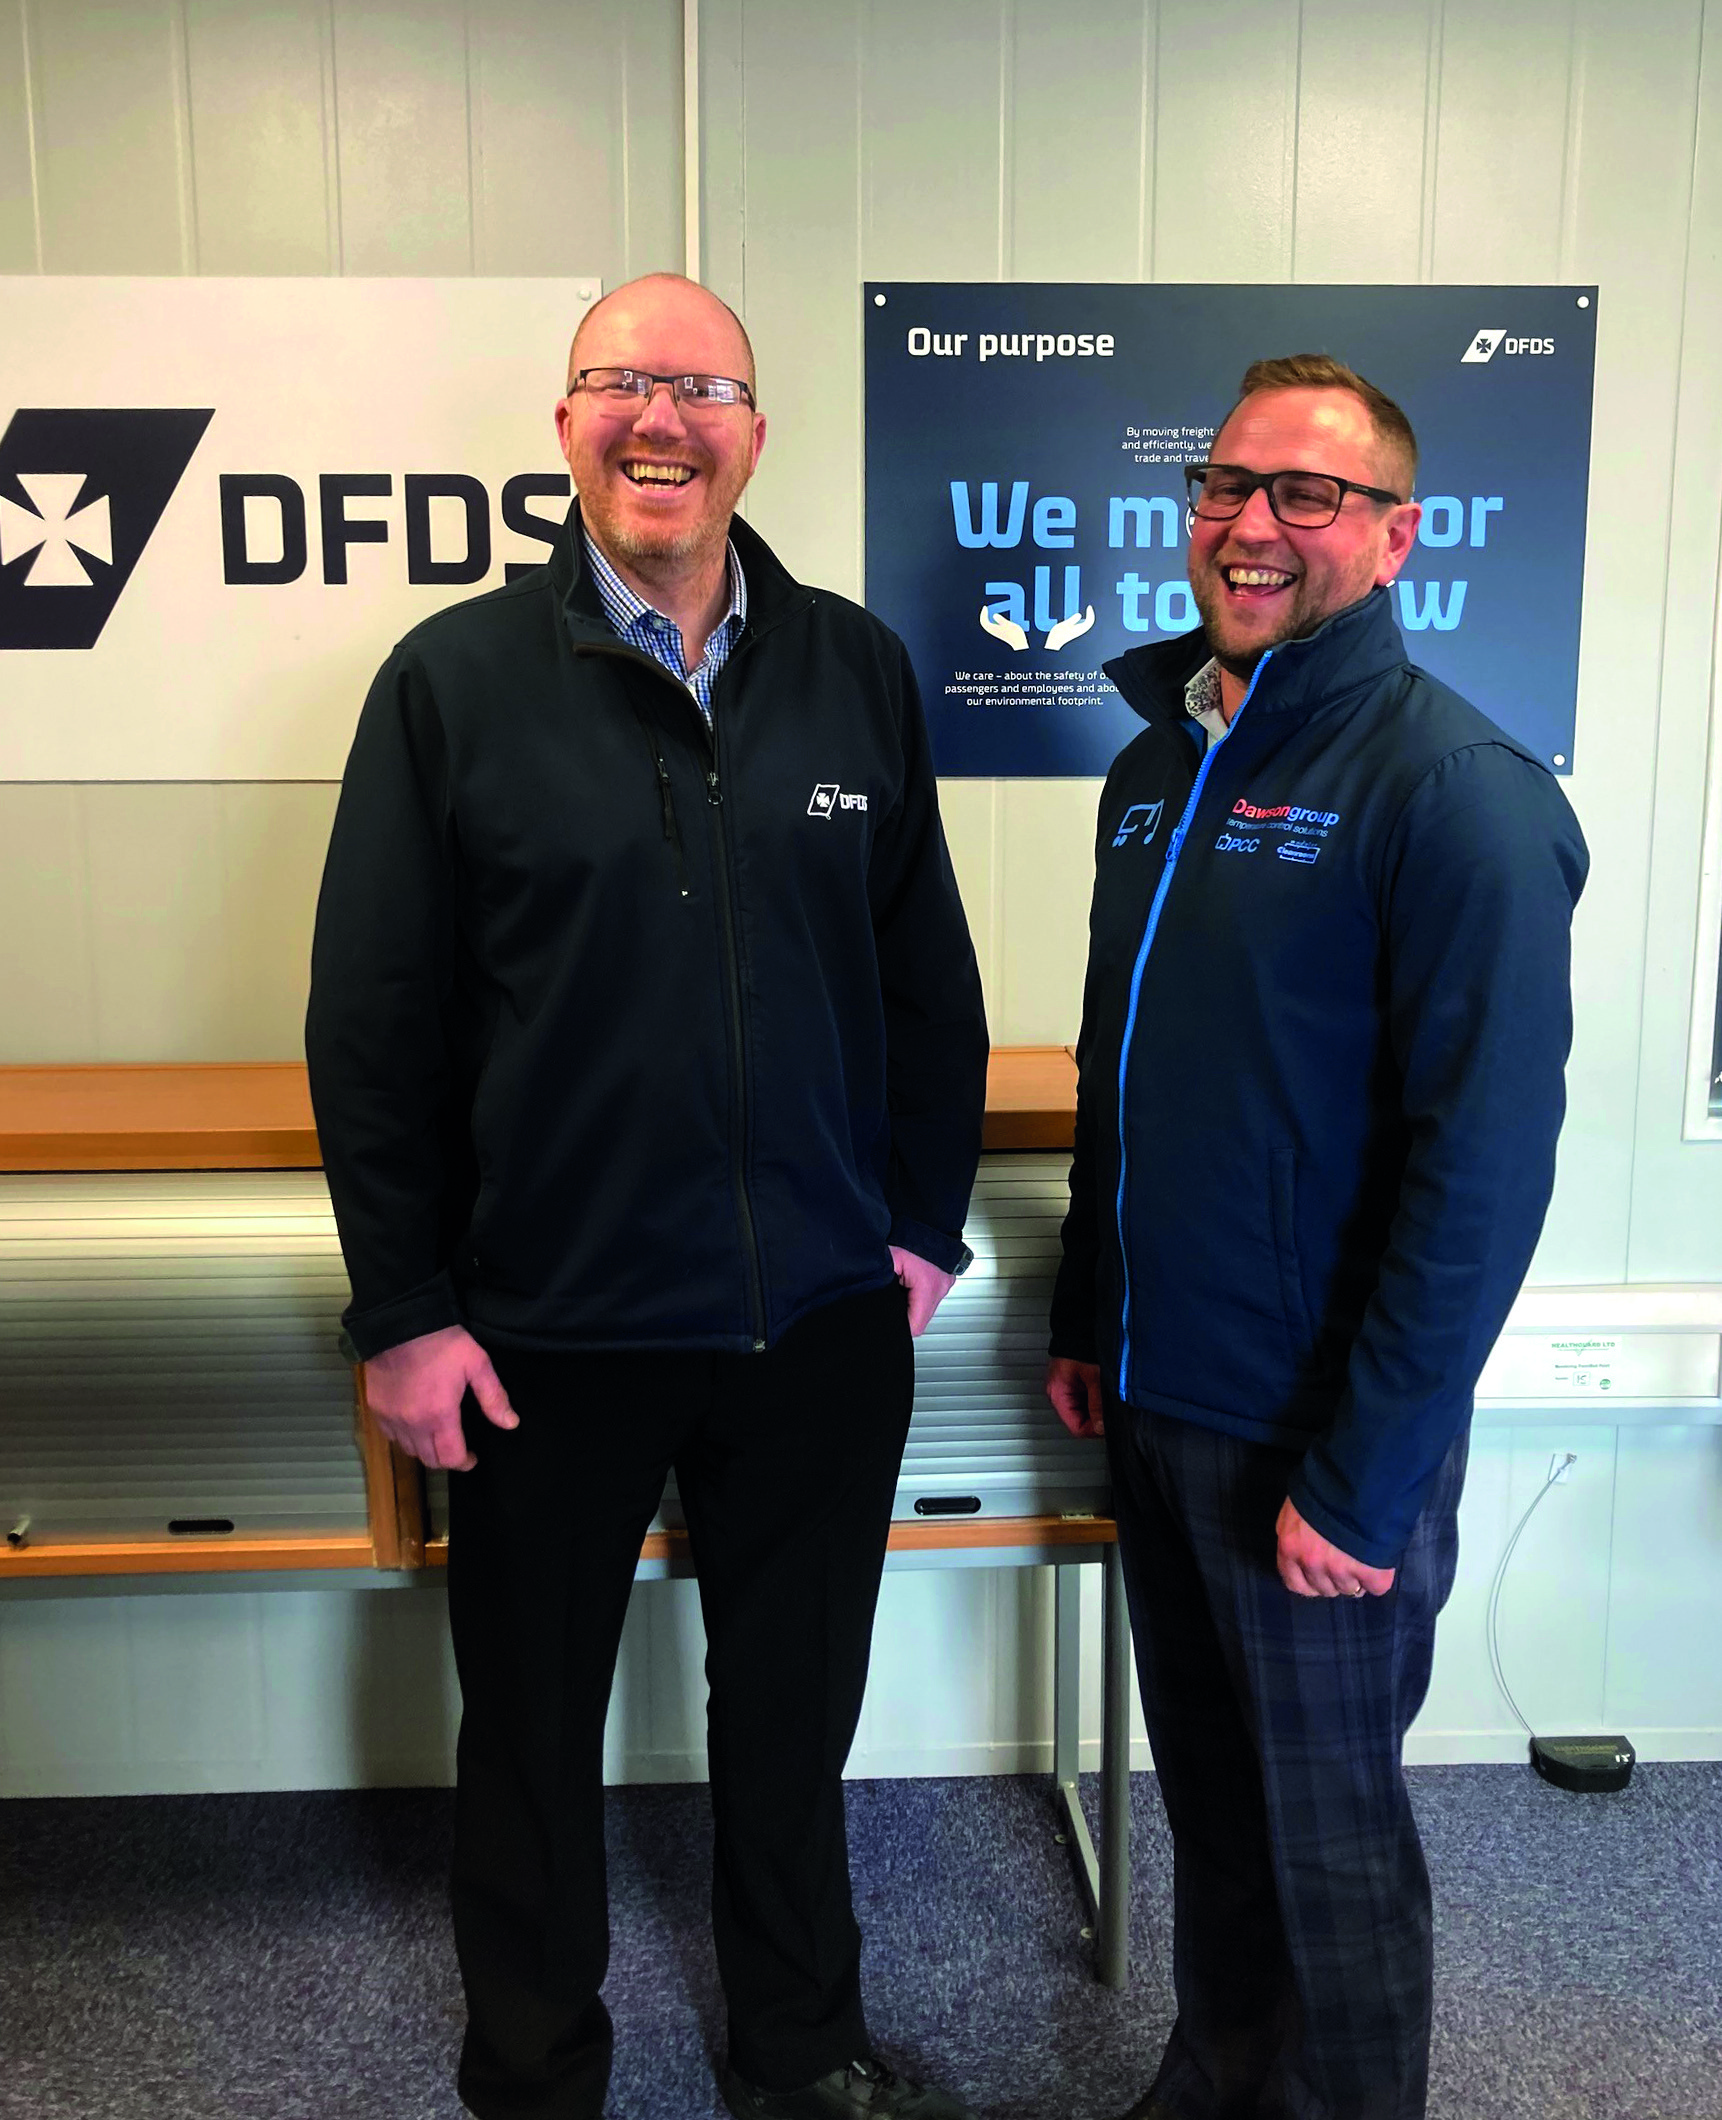 Ian Woodward and Michael Sansum meeting to discuss the energy efficient solutions for DFDS